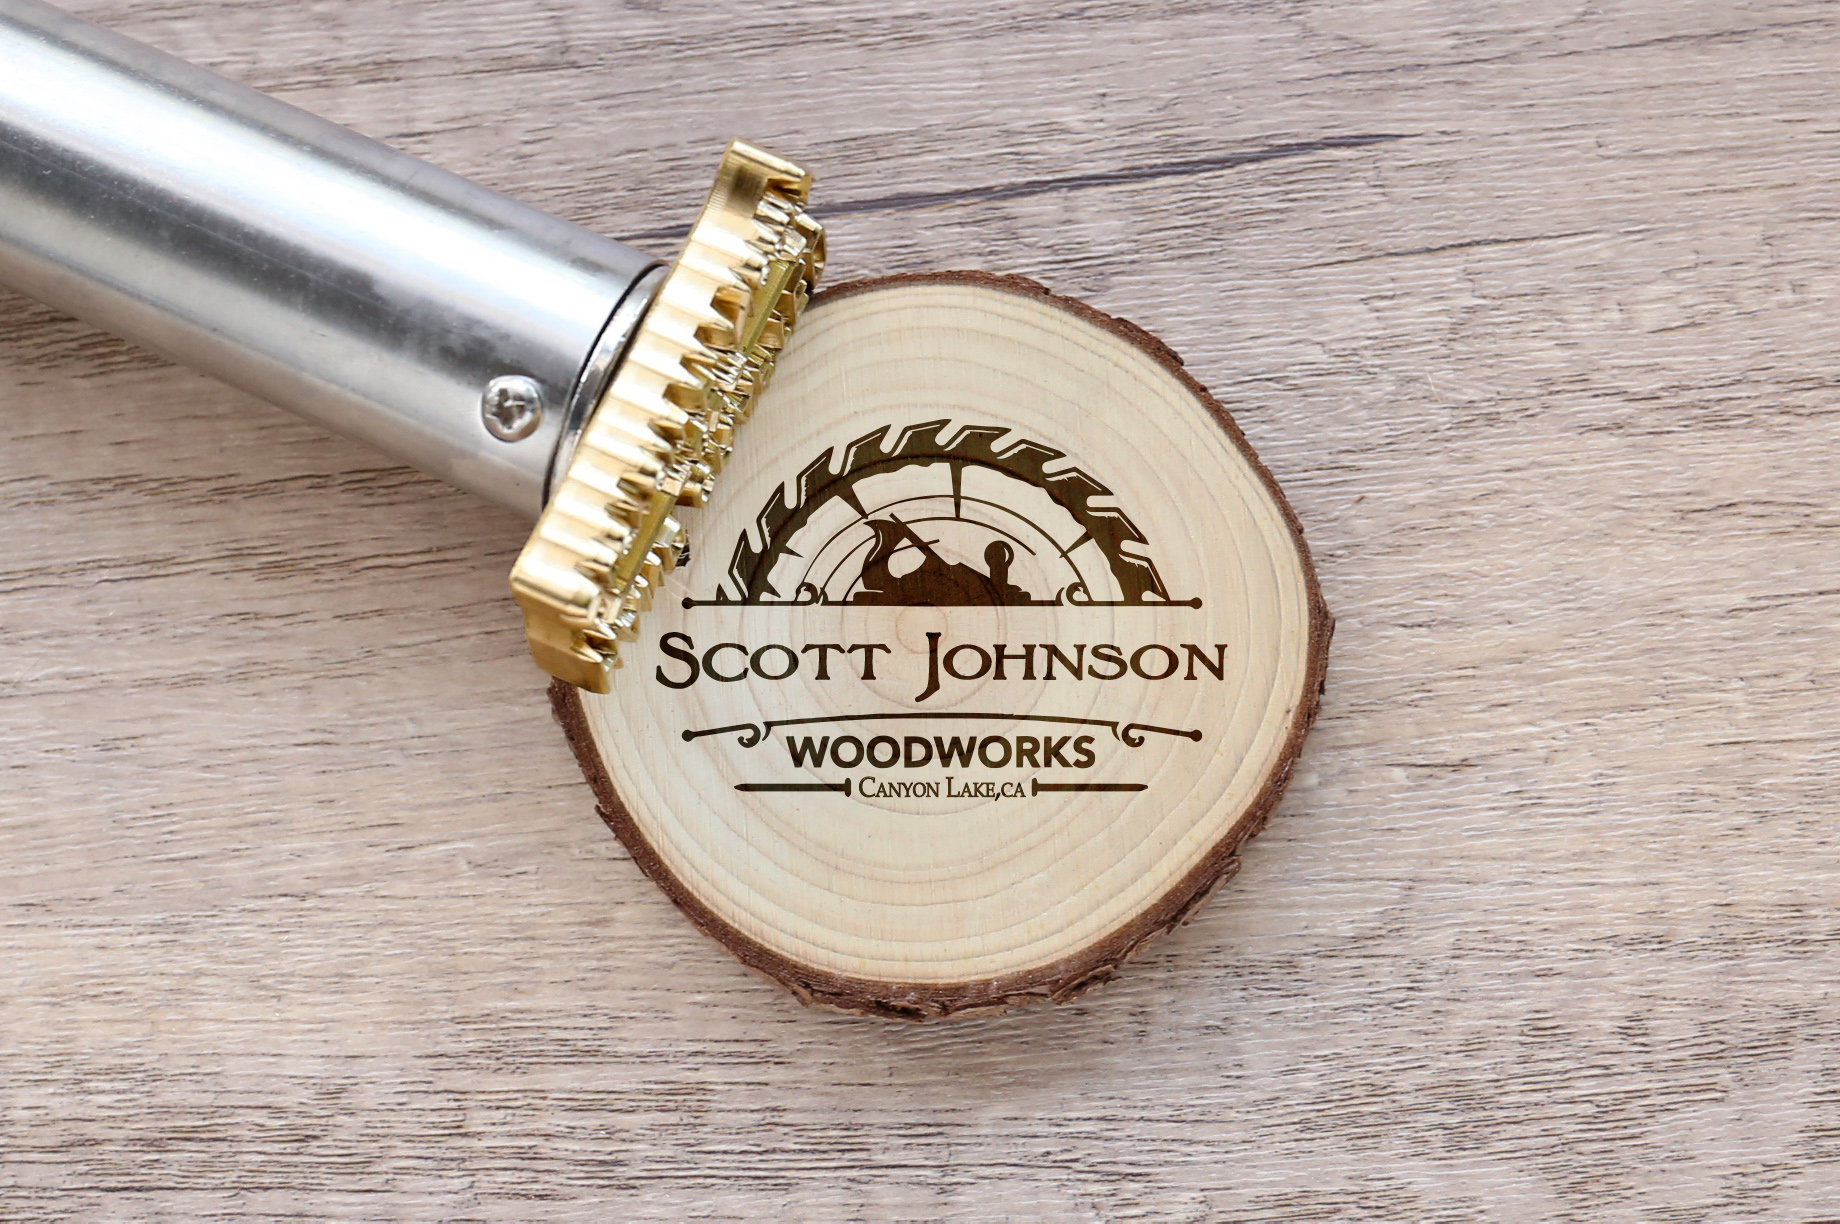 Custom Branding Iron, Custom Wood Burning Stamp, Electric Brand Iron for  Woodworkers, Wood Branding Iron for Gift, Branding Iron for Leather 